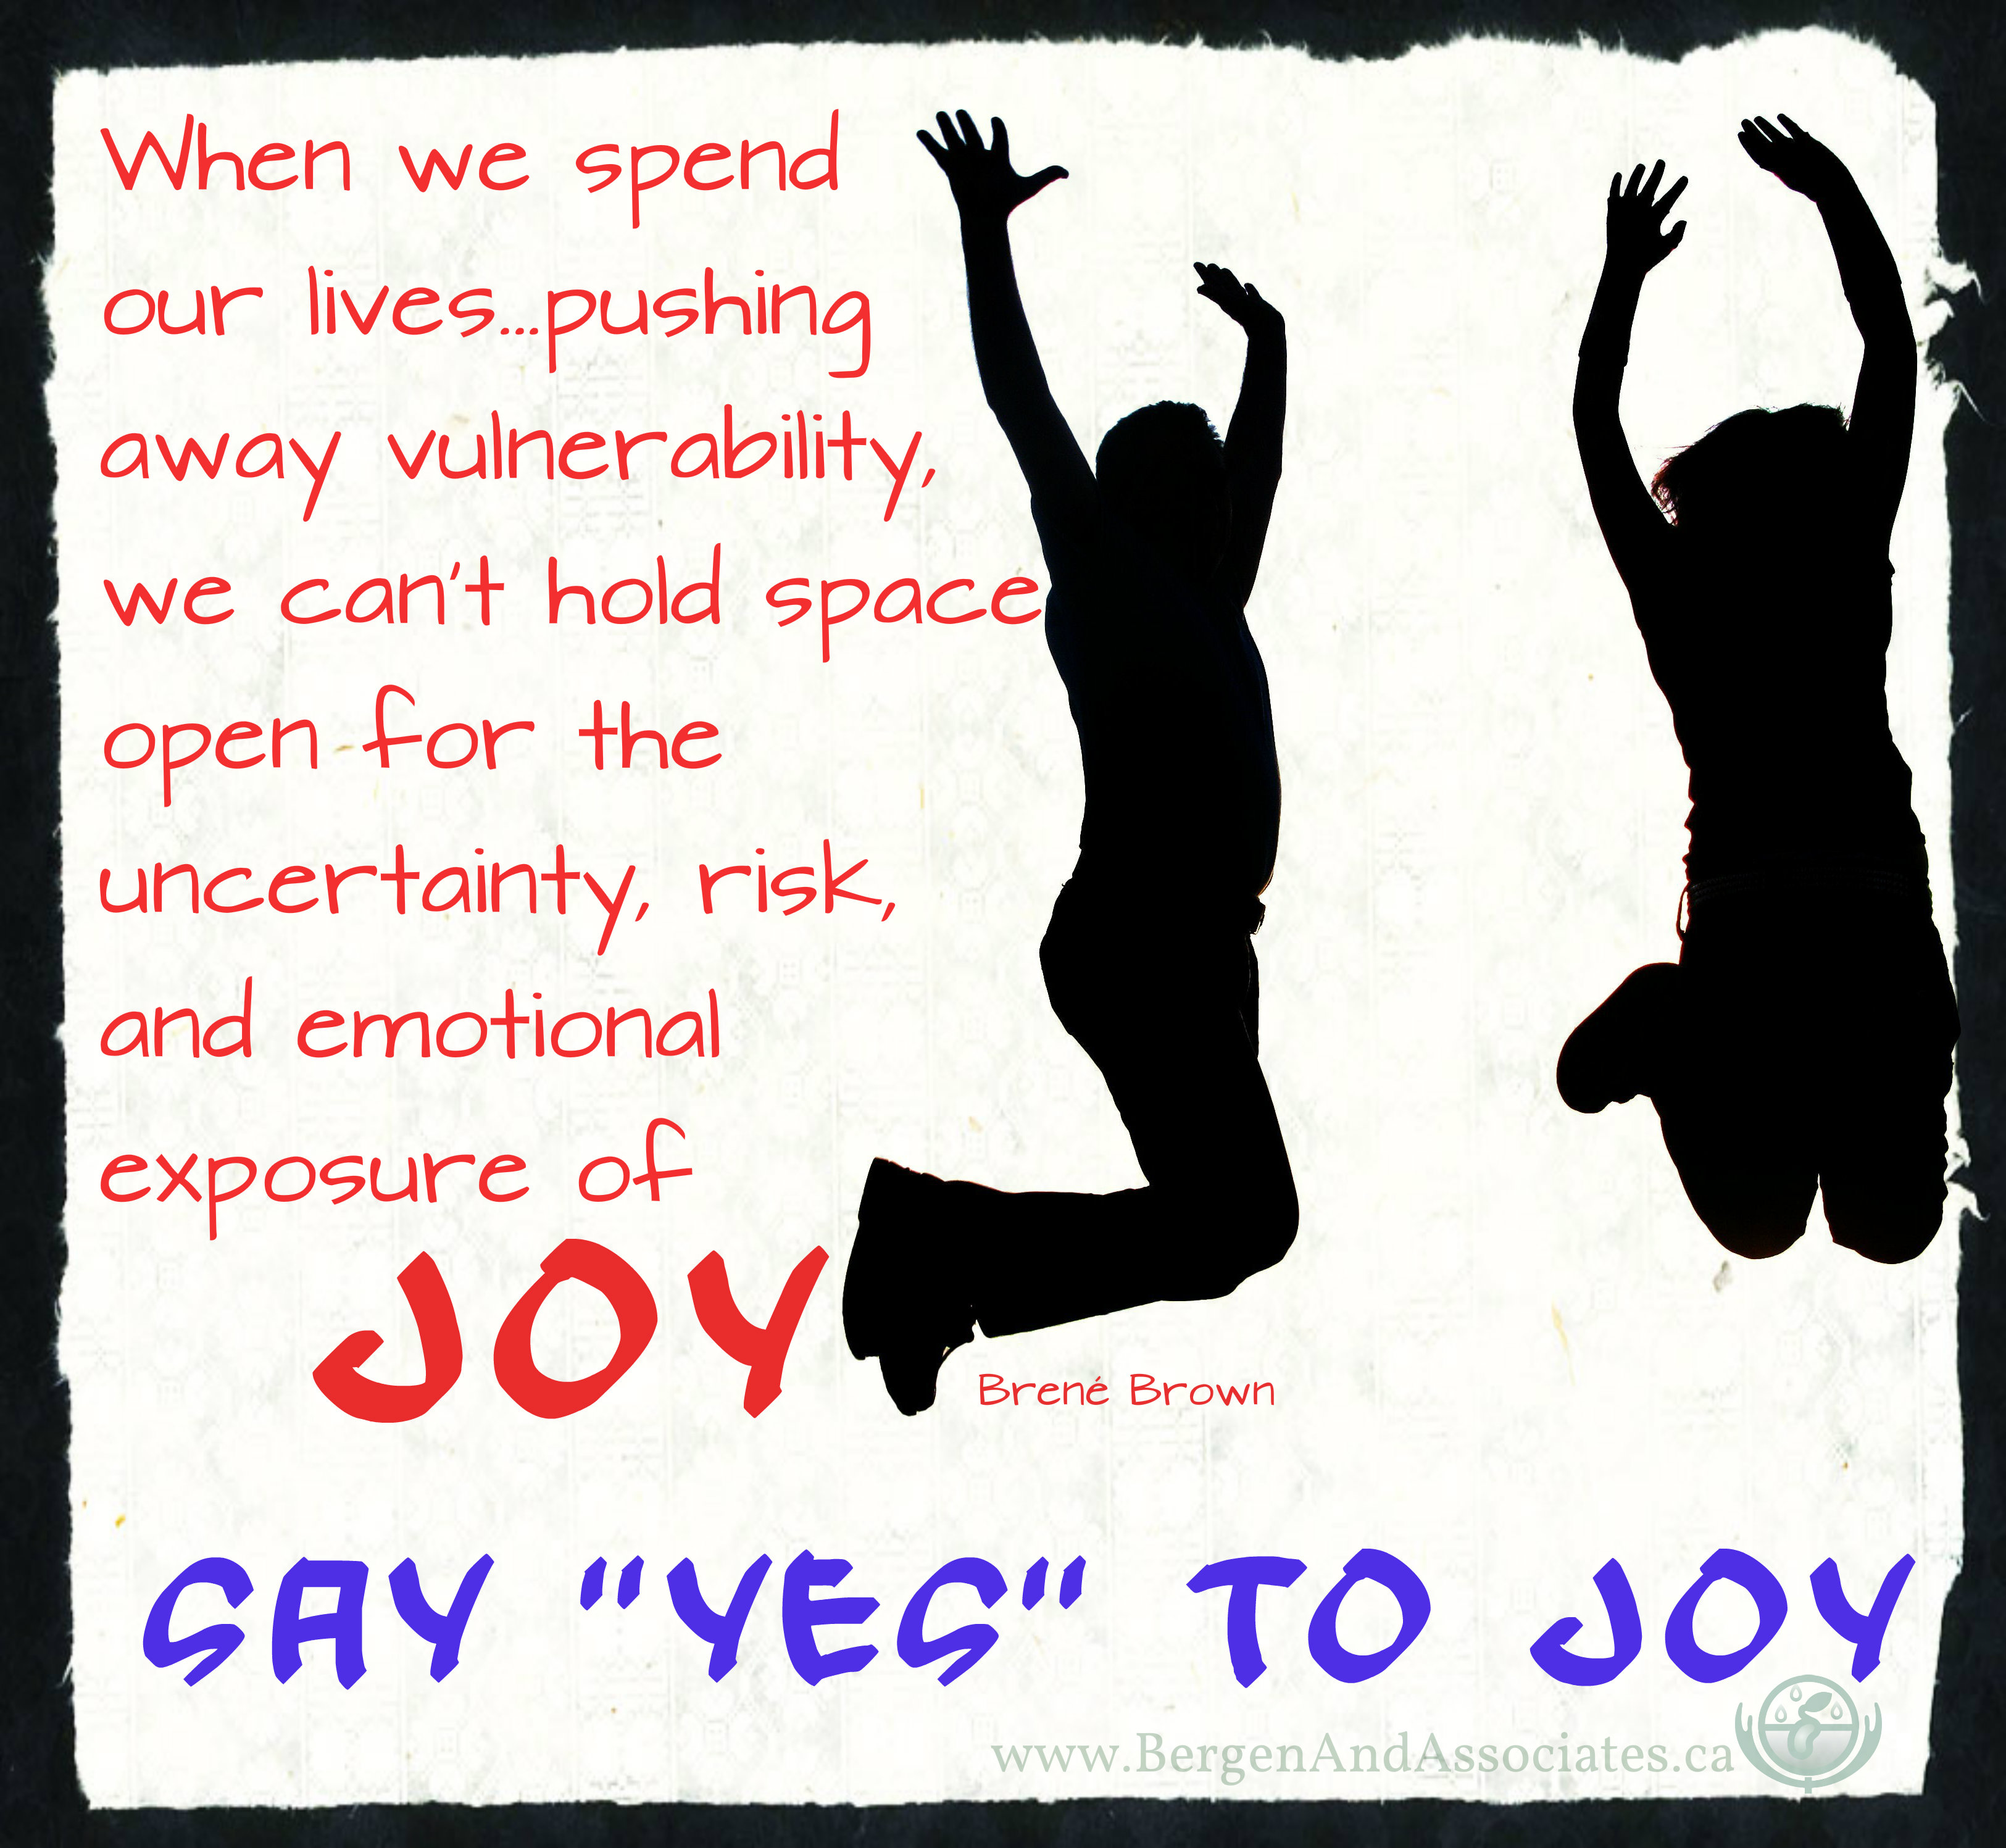 Quote by Brene Brown that describes the vulnerability of joy